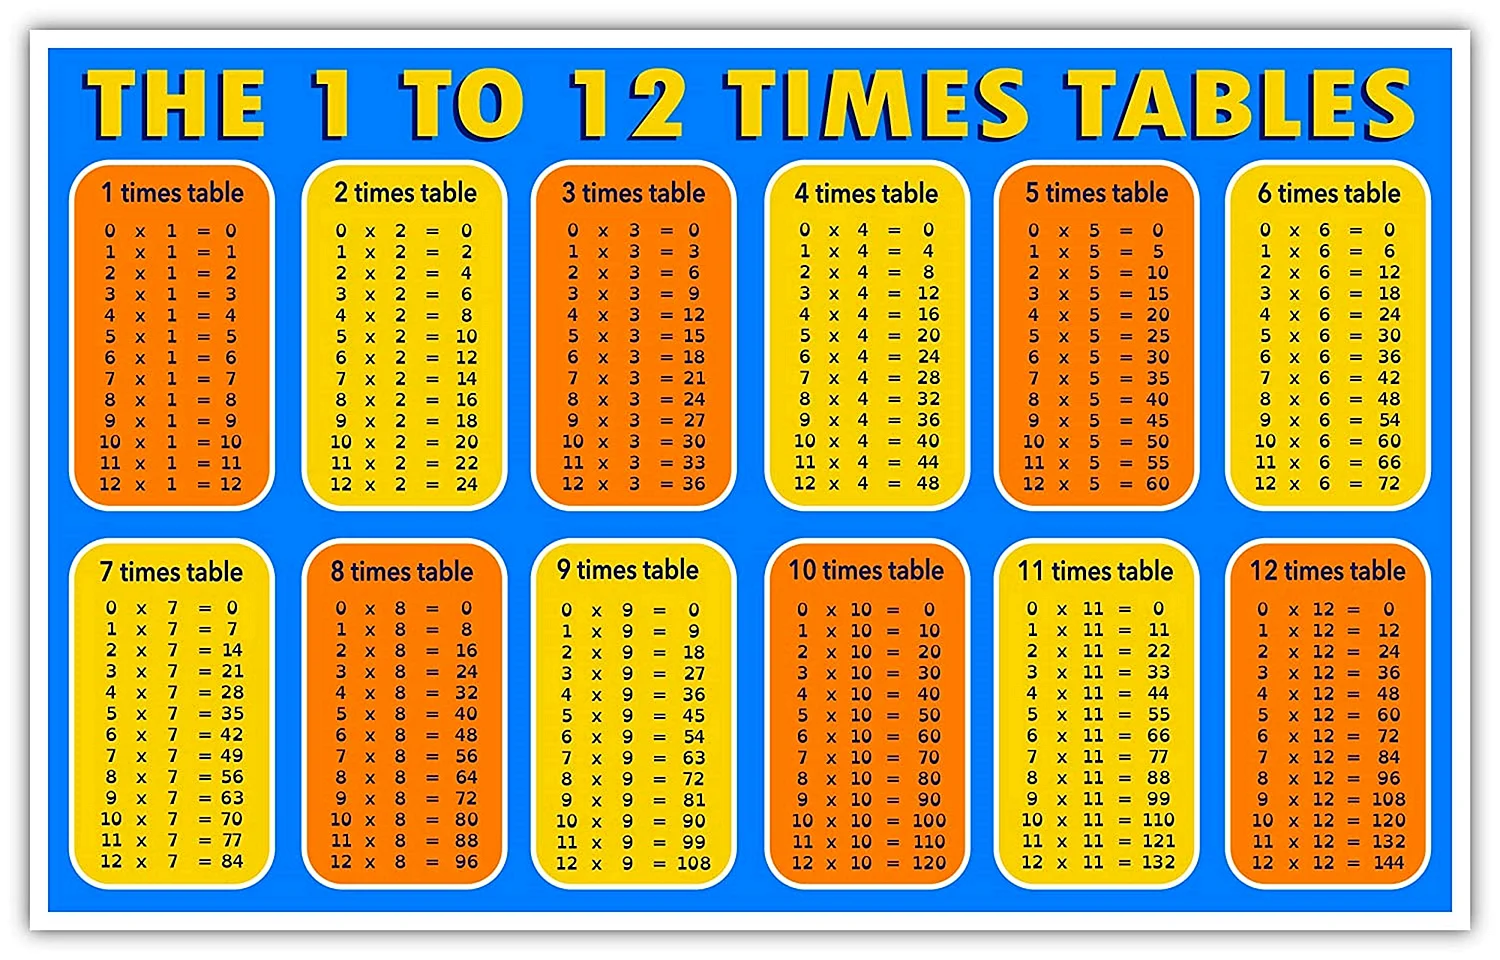 Multiplication Table Wallpapers - Free Multiplication Table Backgrounds ...